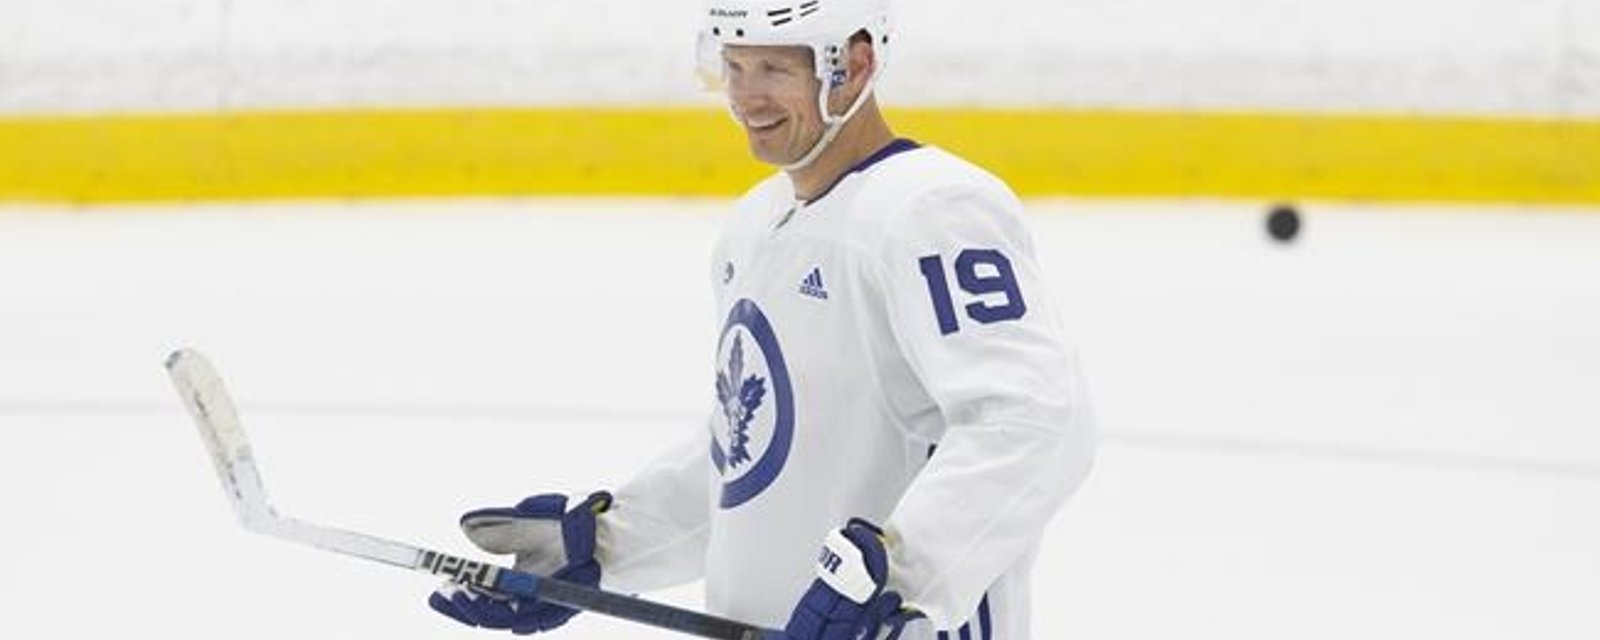 Jason Spezza practices on taxi squad a day after scoring hat trick 